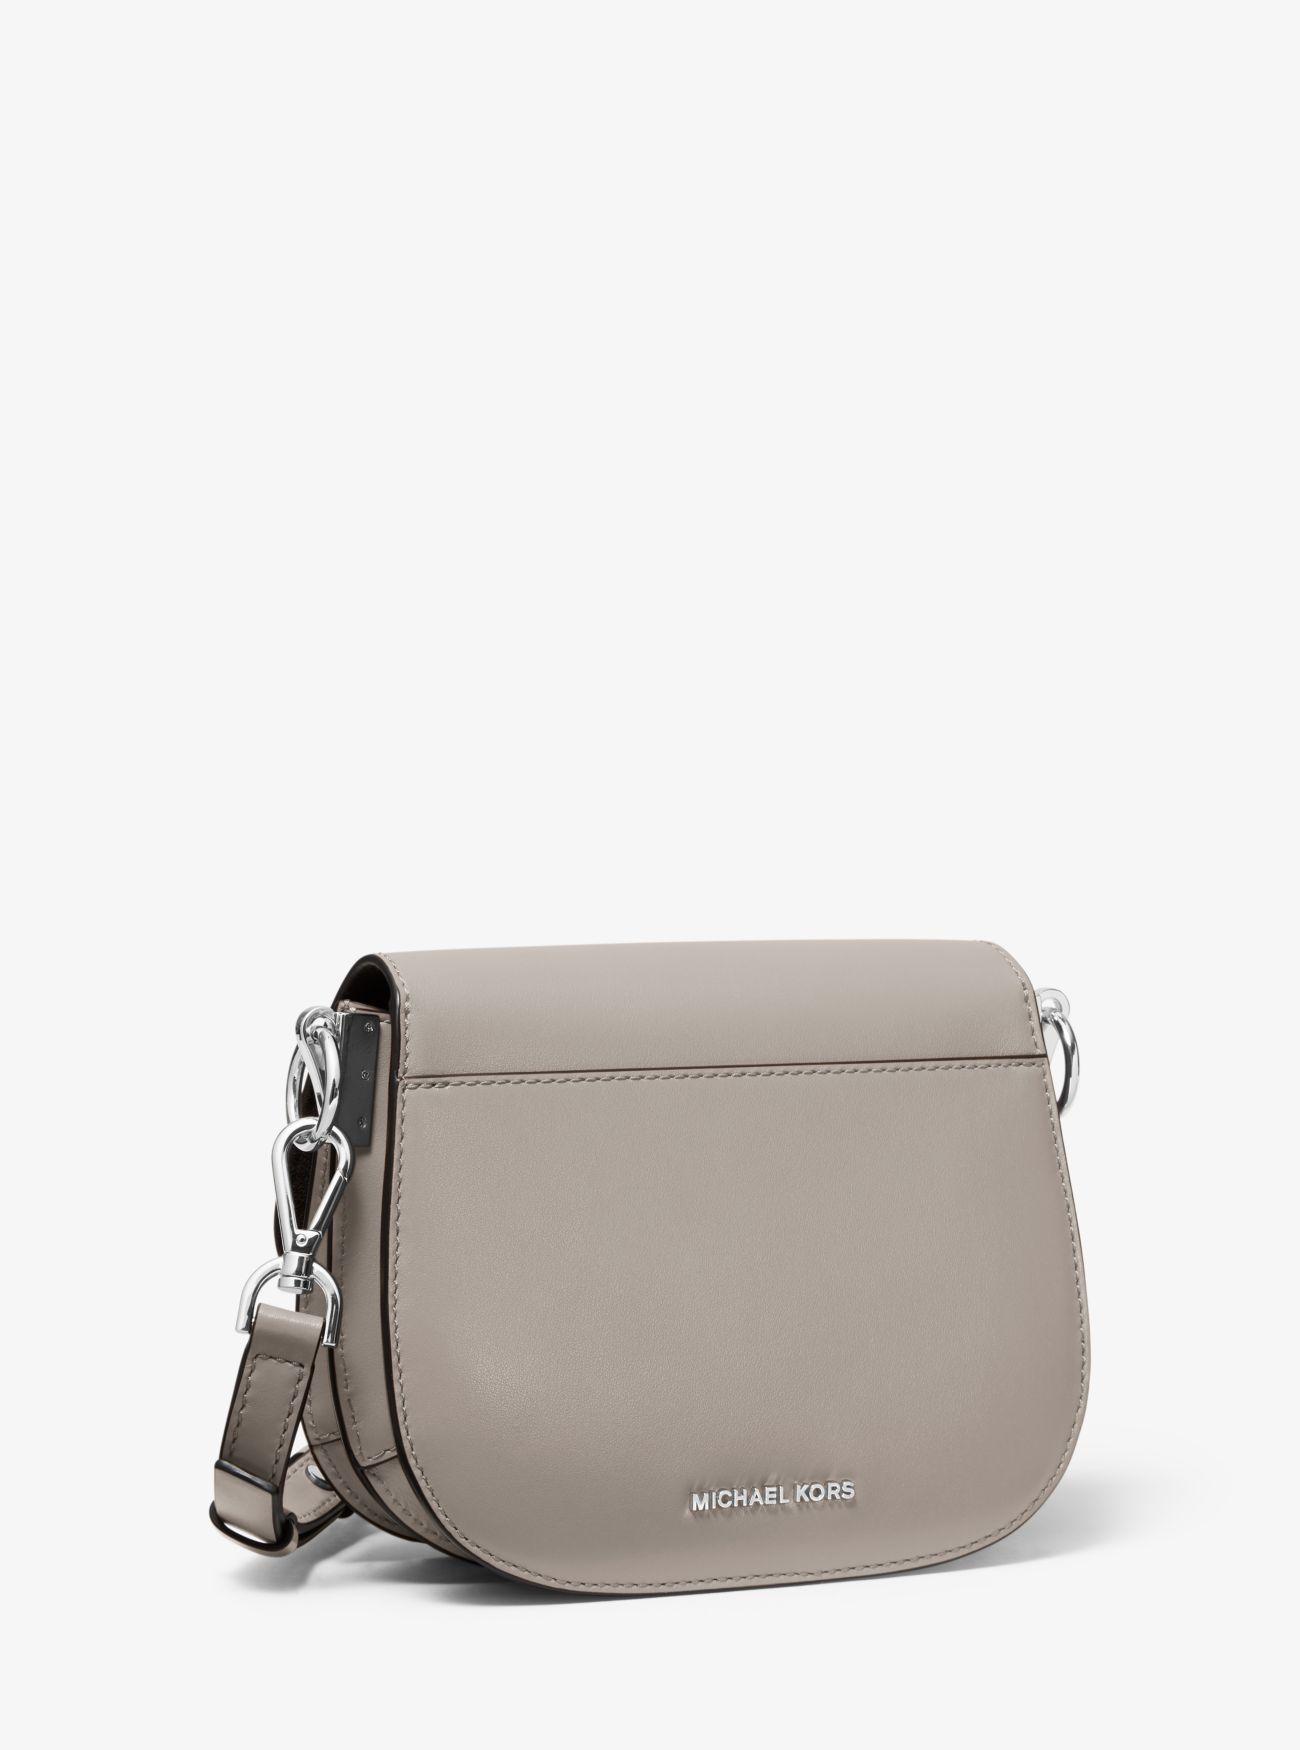 Michael Kors Lillie Small Leather Saddle Bag in Pearl Grey (Grey) - Lyst